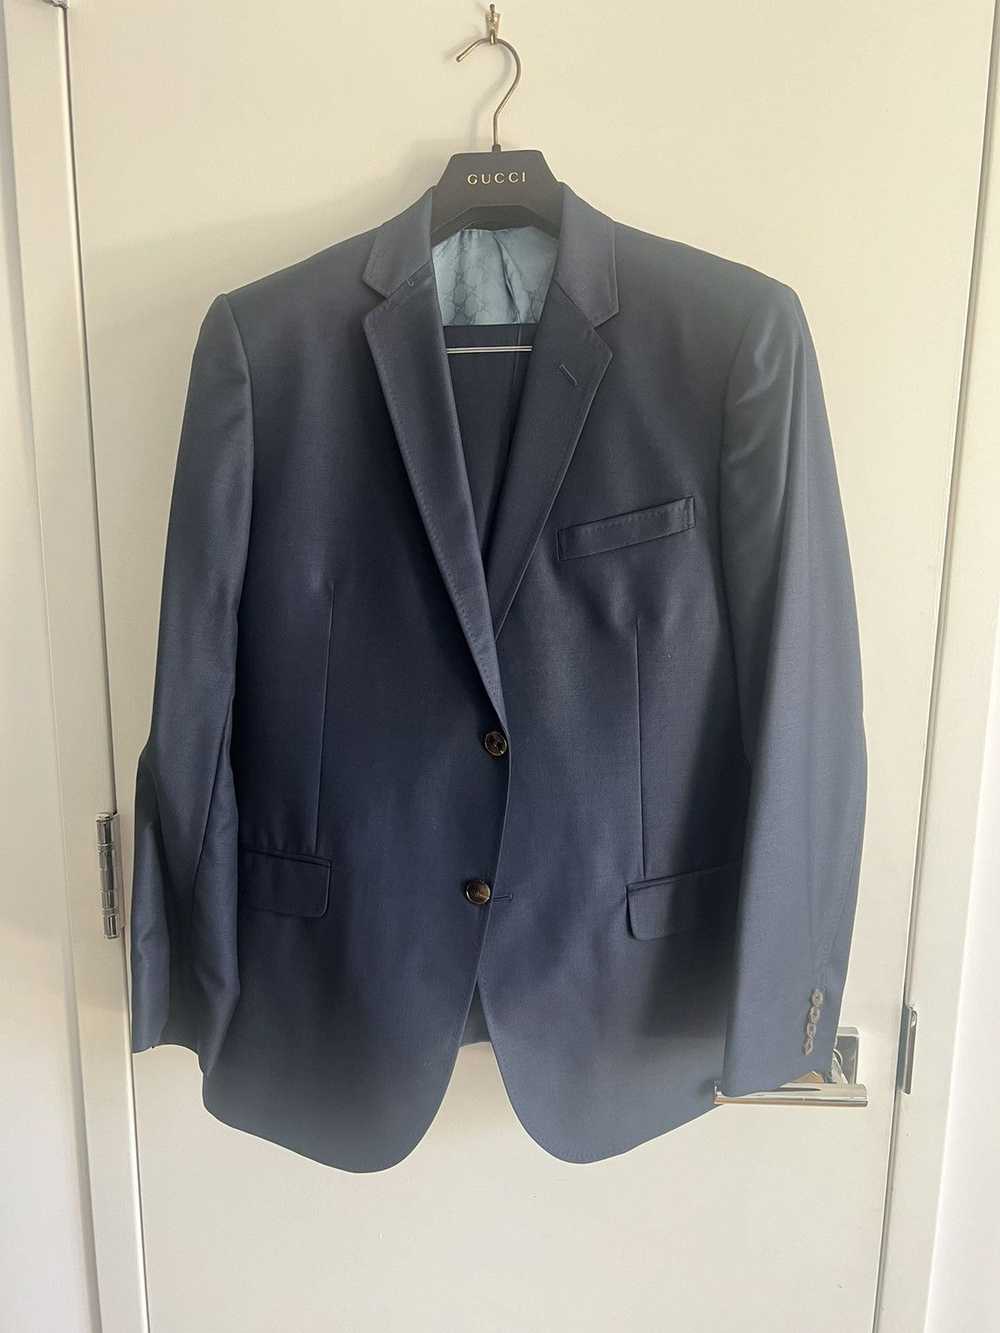 Gucci Gucci Suit in Navy Birdseye Wool Size US44/… - image 1